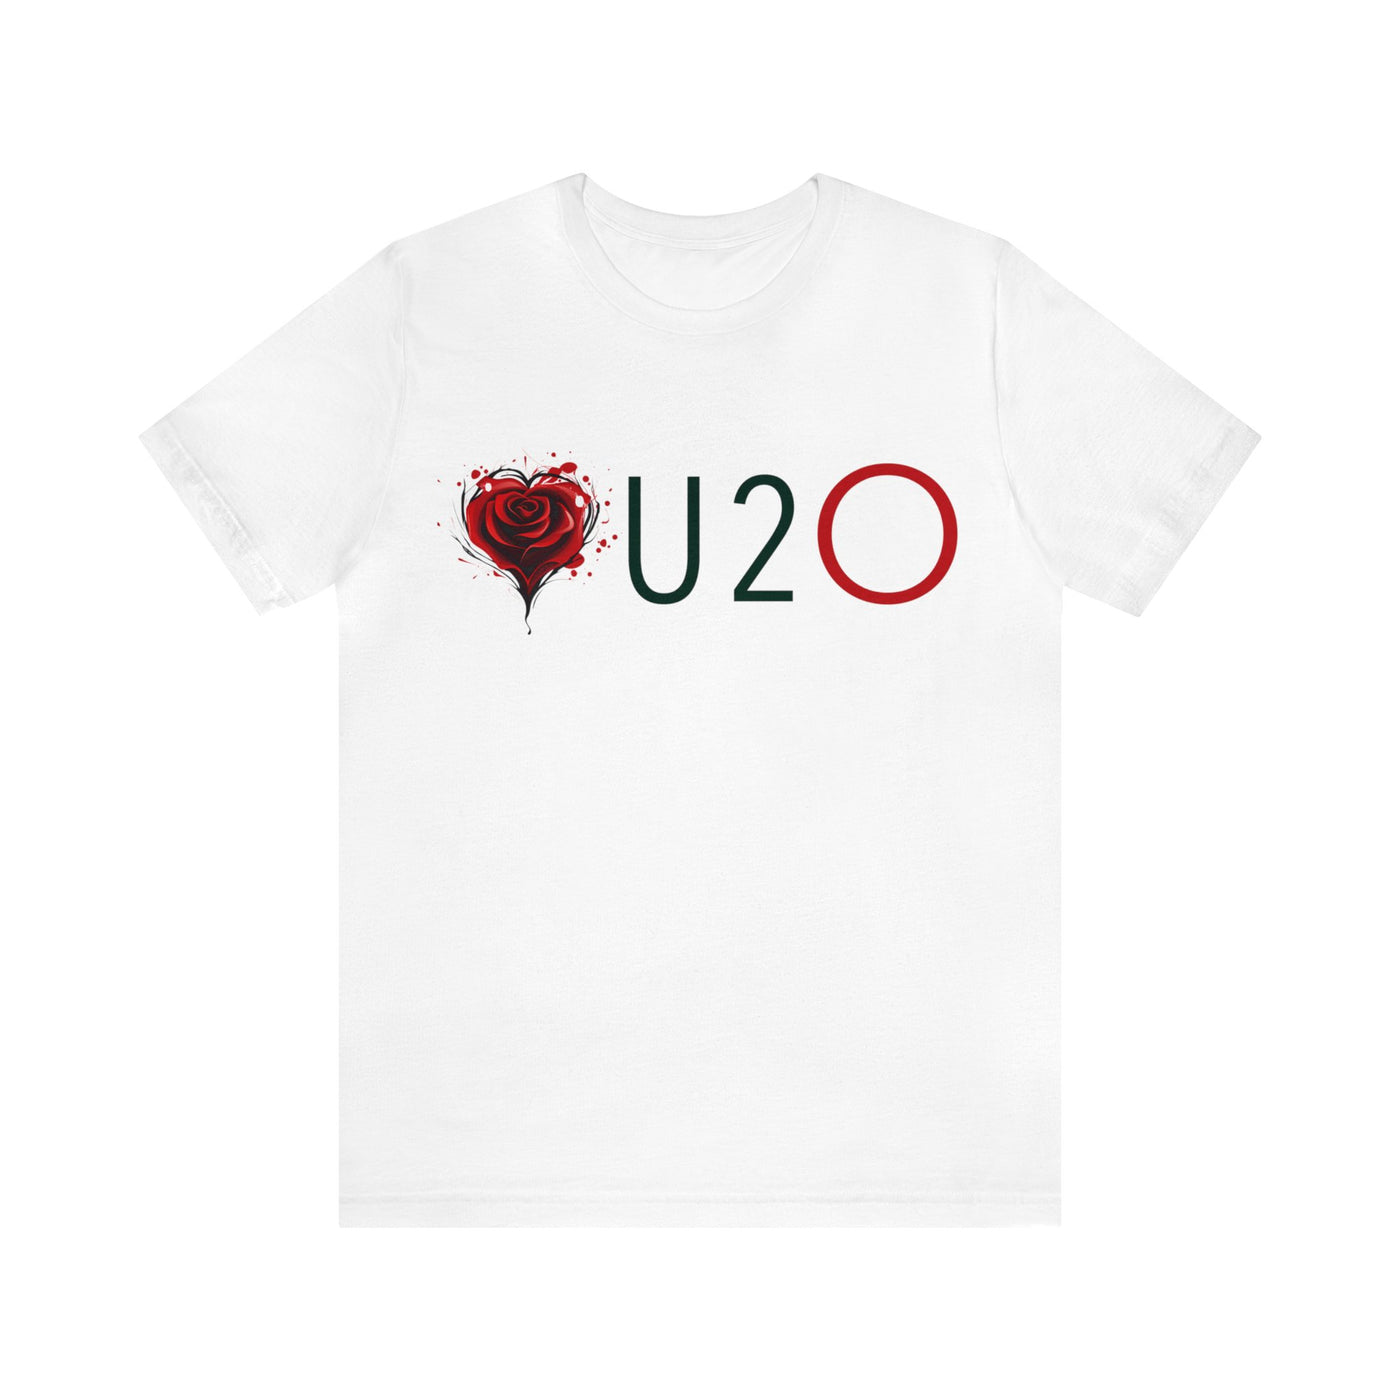 ♥️ U 2 ⭕️: Love You To Wholeness Glam Tee - G'wan by Charon